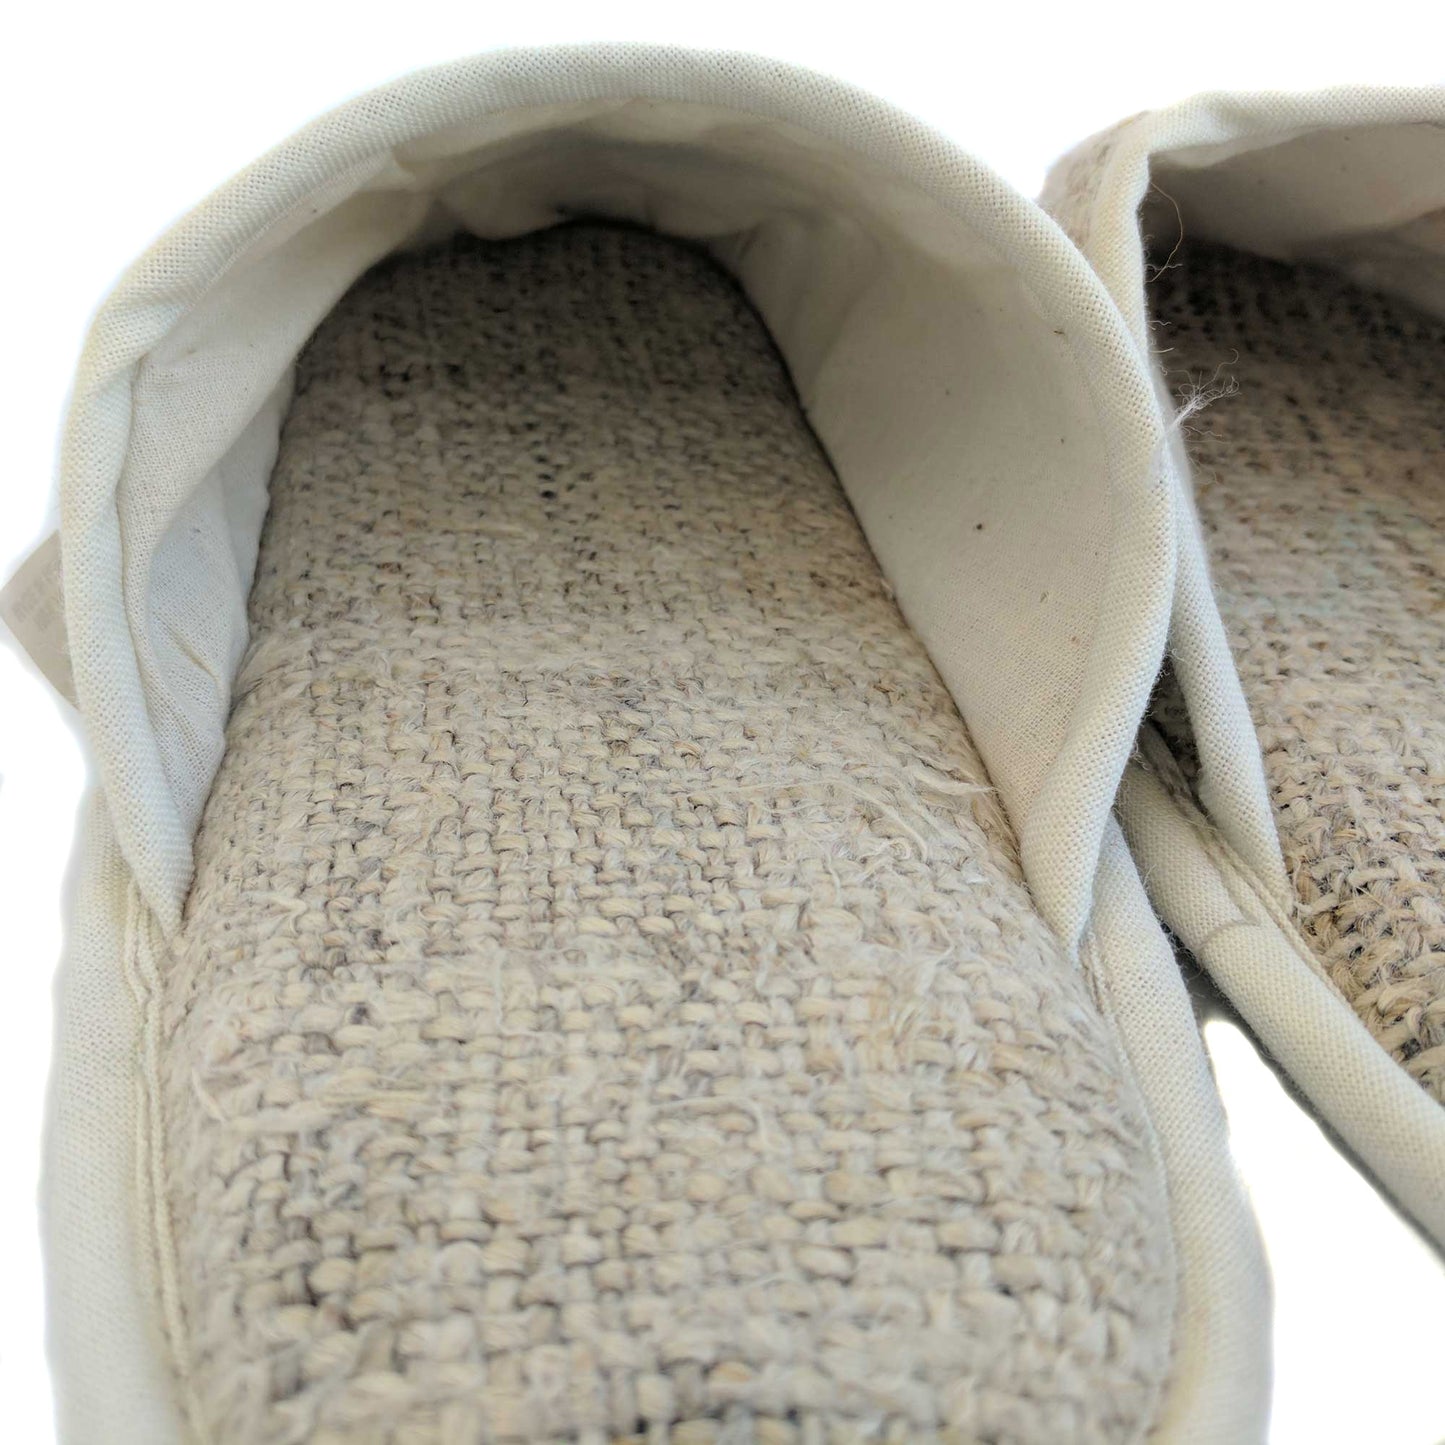 HEMP Slippers made from 100% natural, organic and eco-friendly handwoven HEMP